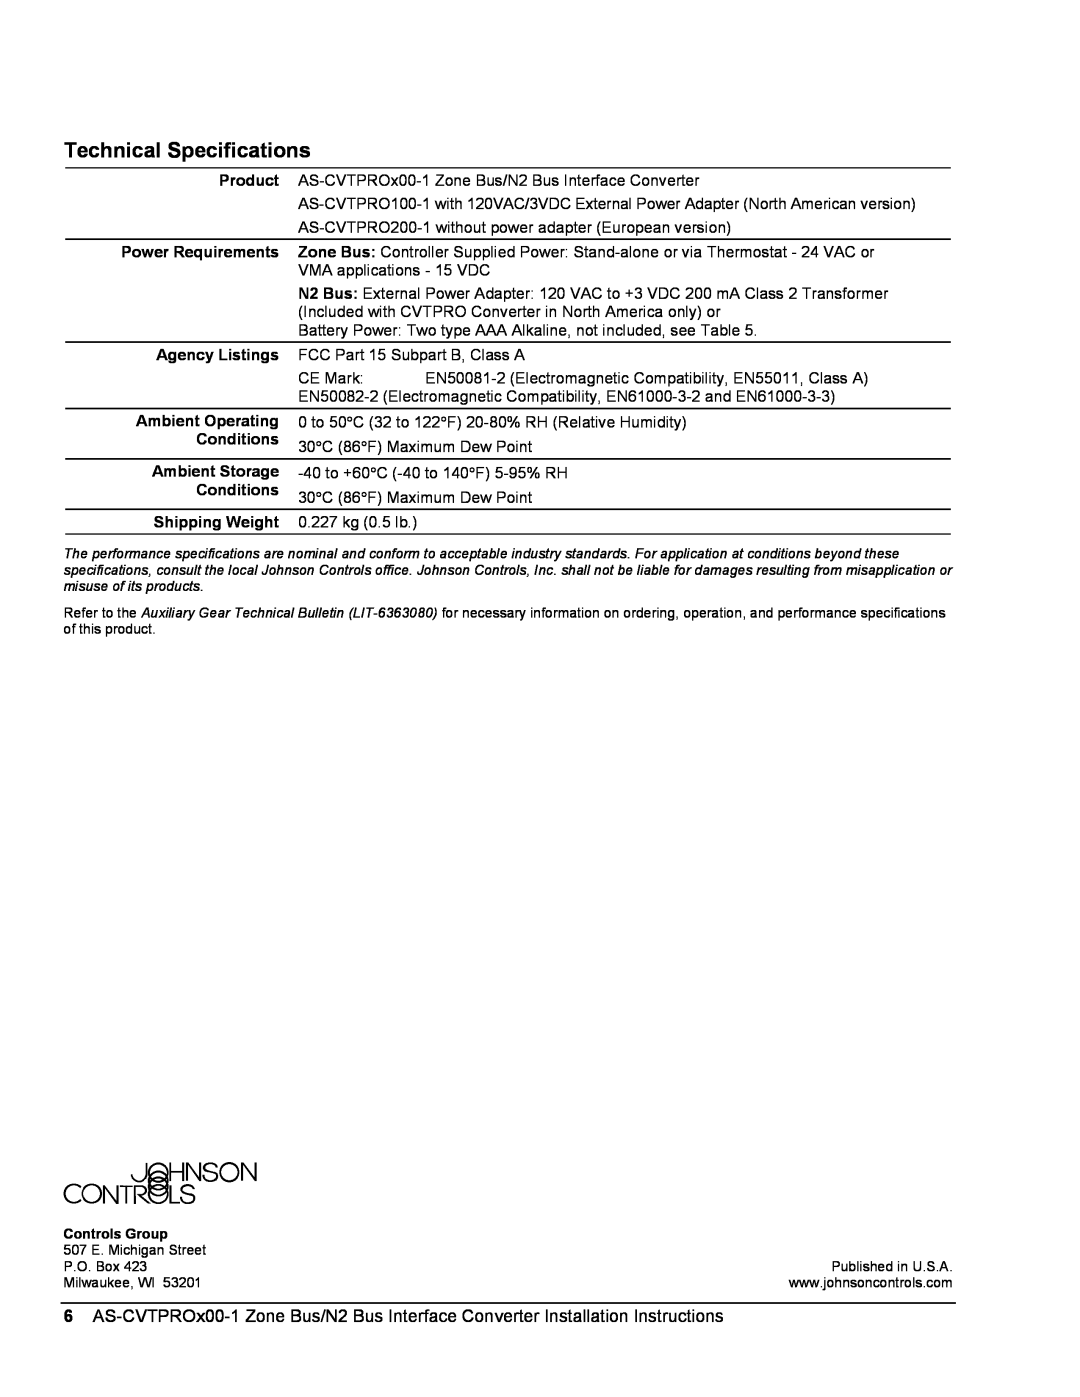 Johnson Controls AS-CVTPROx00-1 Technical Specifications, Product, Power Requirements, Agency Listings, Ambient Operating 